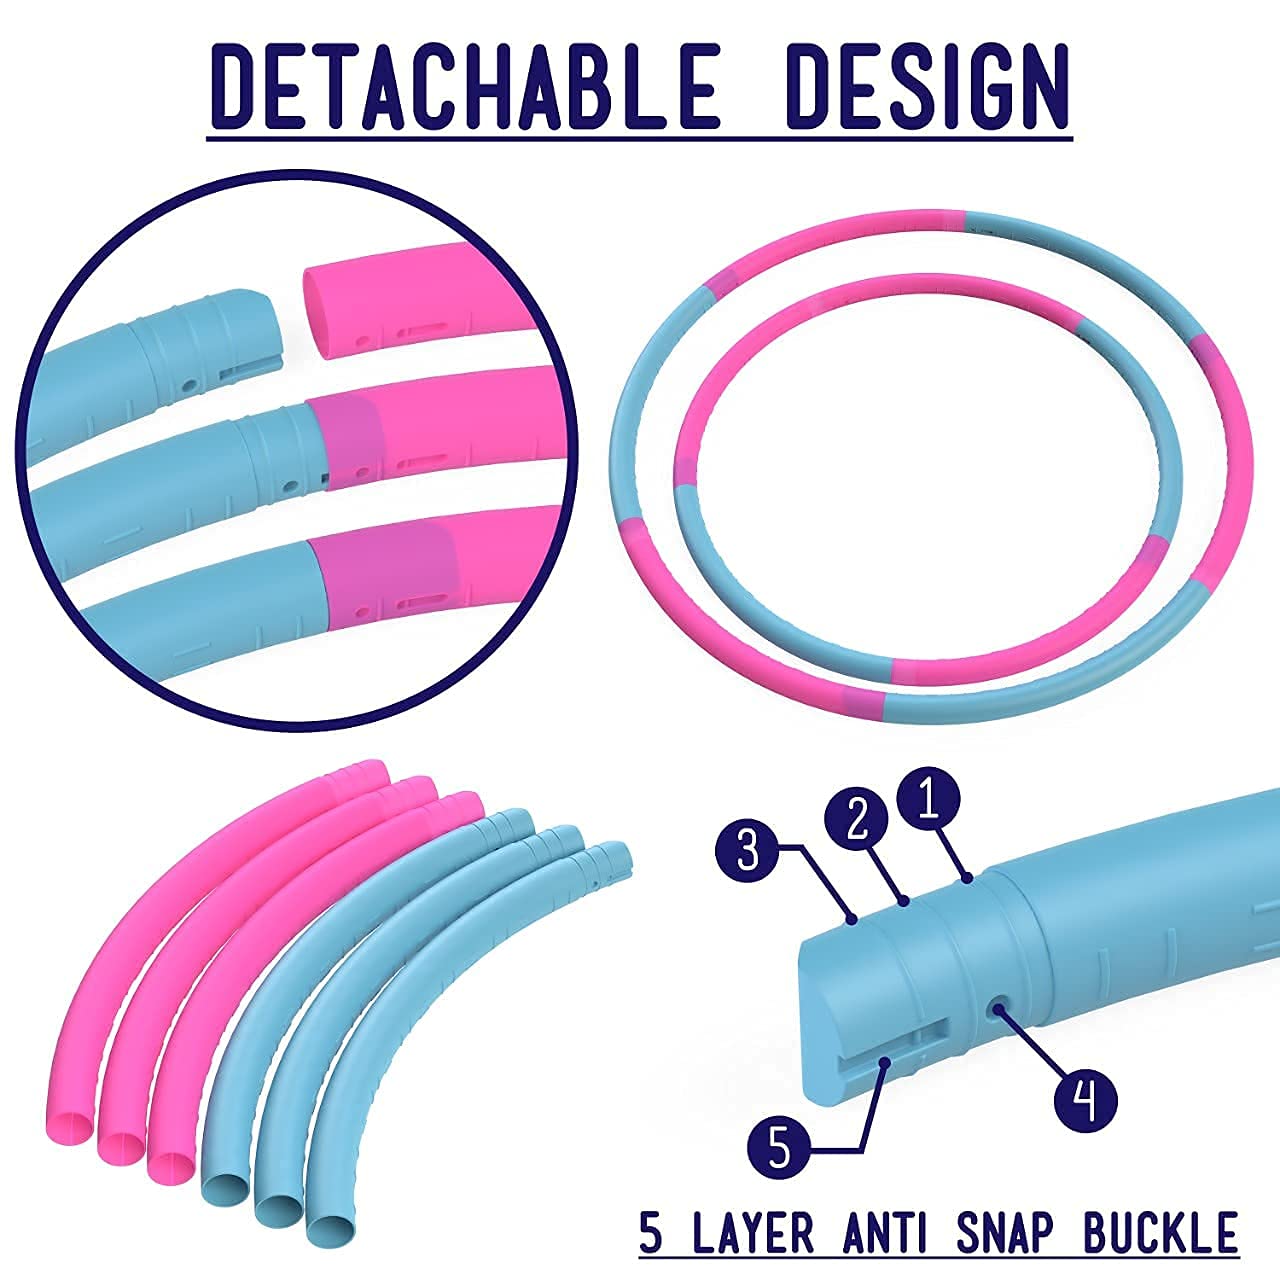 The Toyagator Hula Hoop for Kids, Pink & Blue 6 Section Premium Quality Fitness Hoola Hoops Toy, Detachable & Size Adjustable Suitable for Fun Exercise, Dance, Girls, Boys & Pet Training.